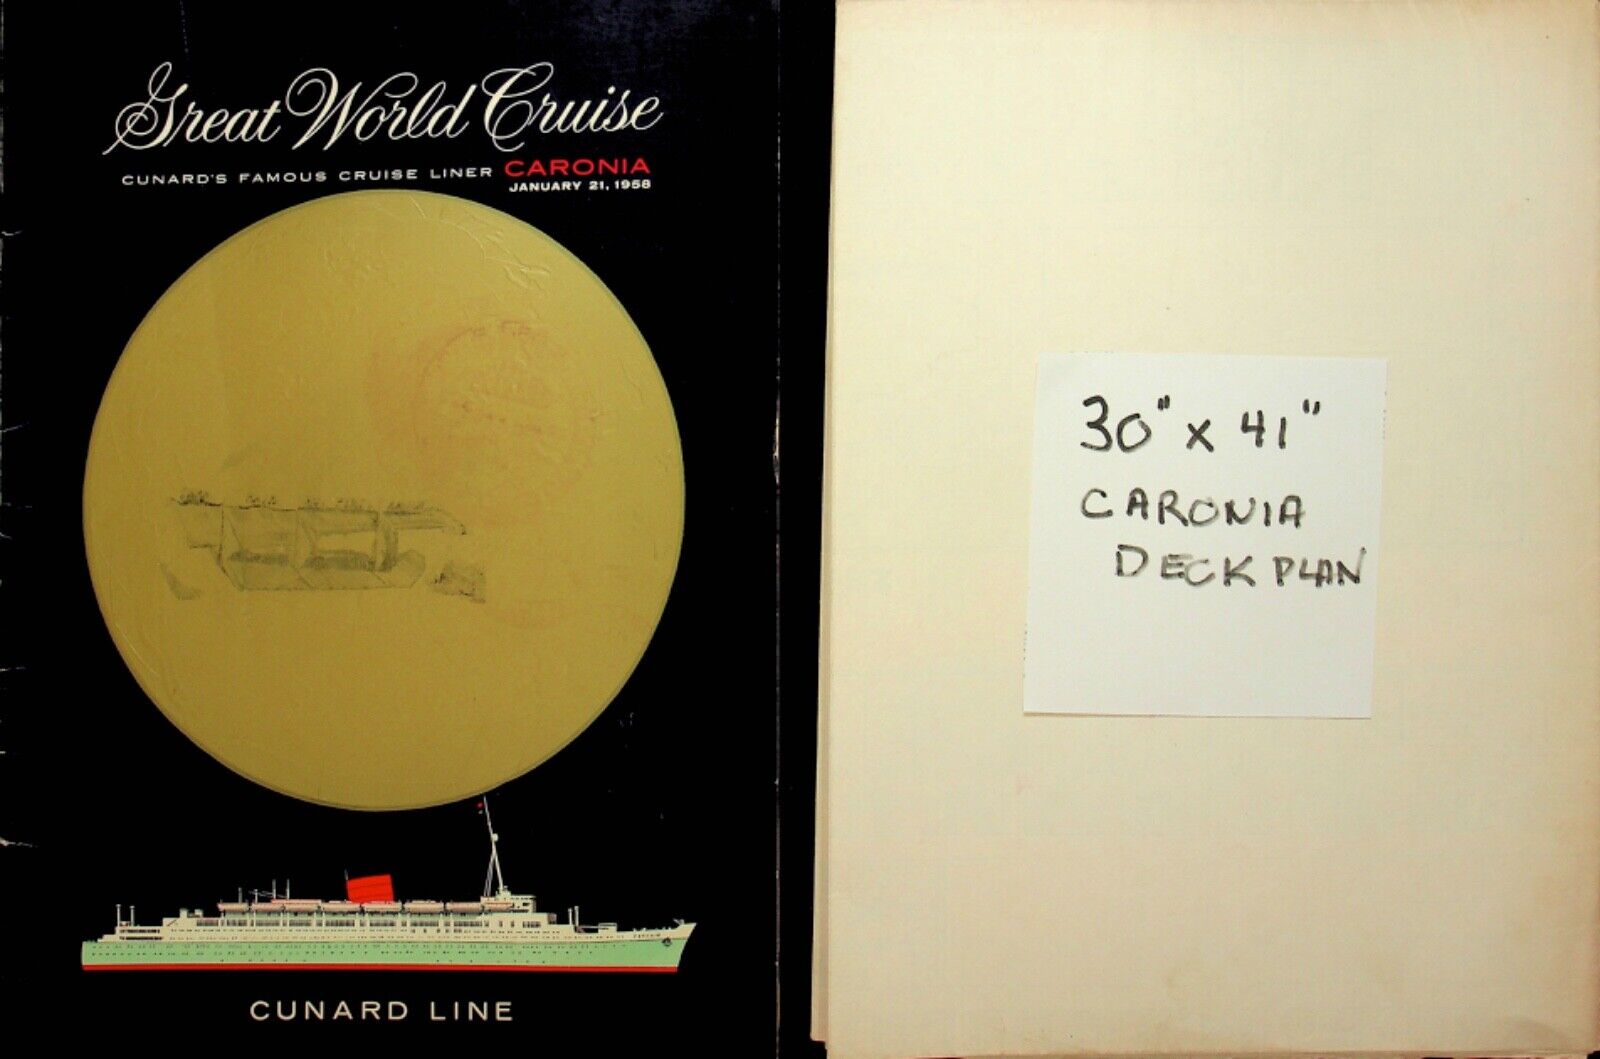 1958 GREAT  108 DAY CUNARD WORLD CRUISE ON THE CARONIA BOOKLET/DECK PLAN -E15-E